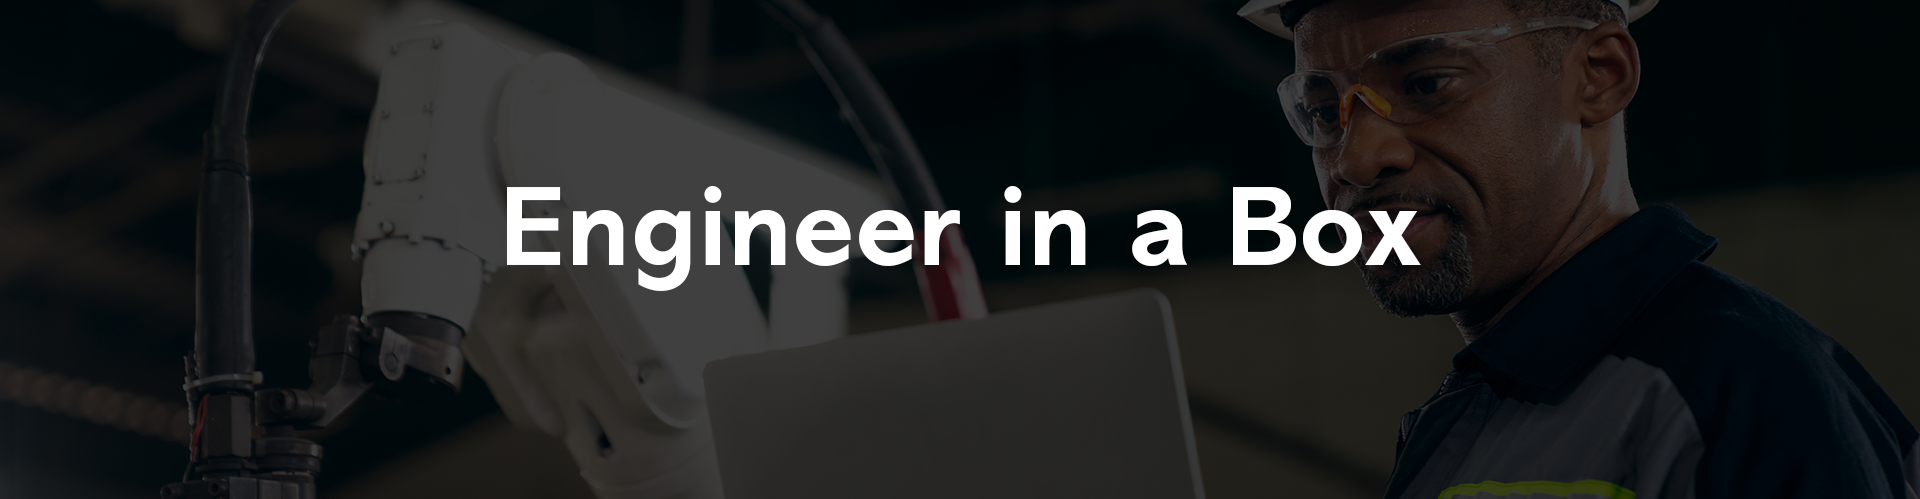 Engineer in a Box Whitepaper